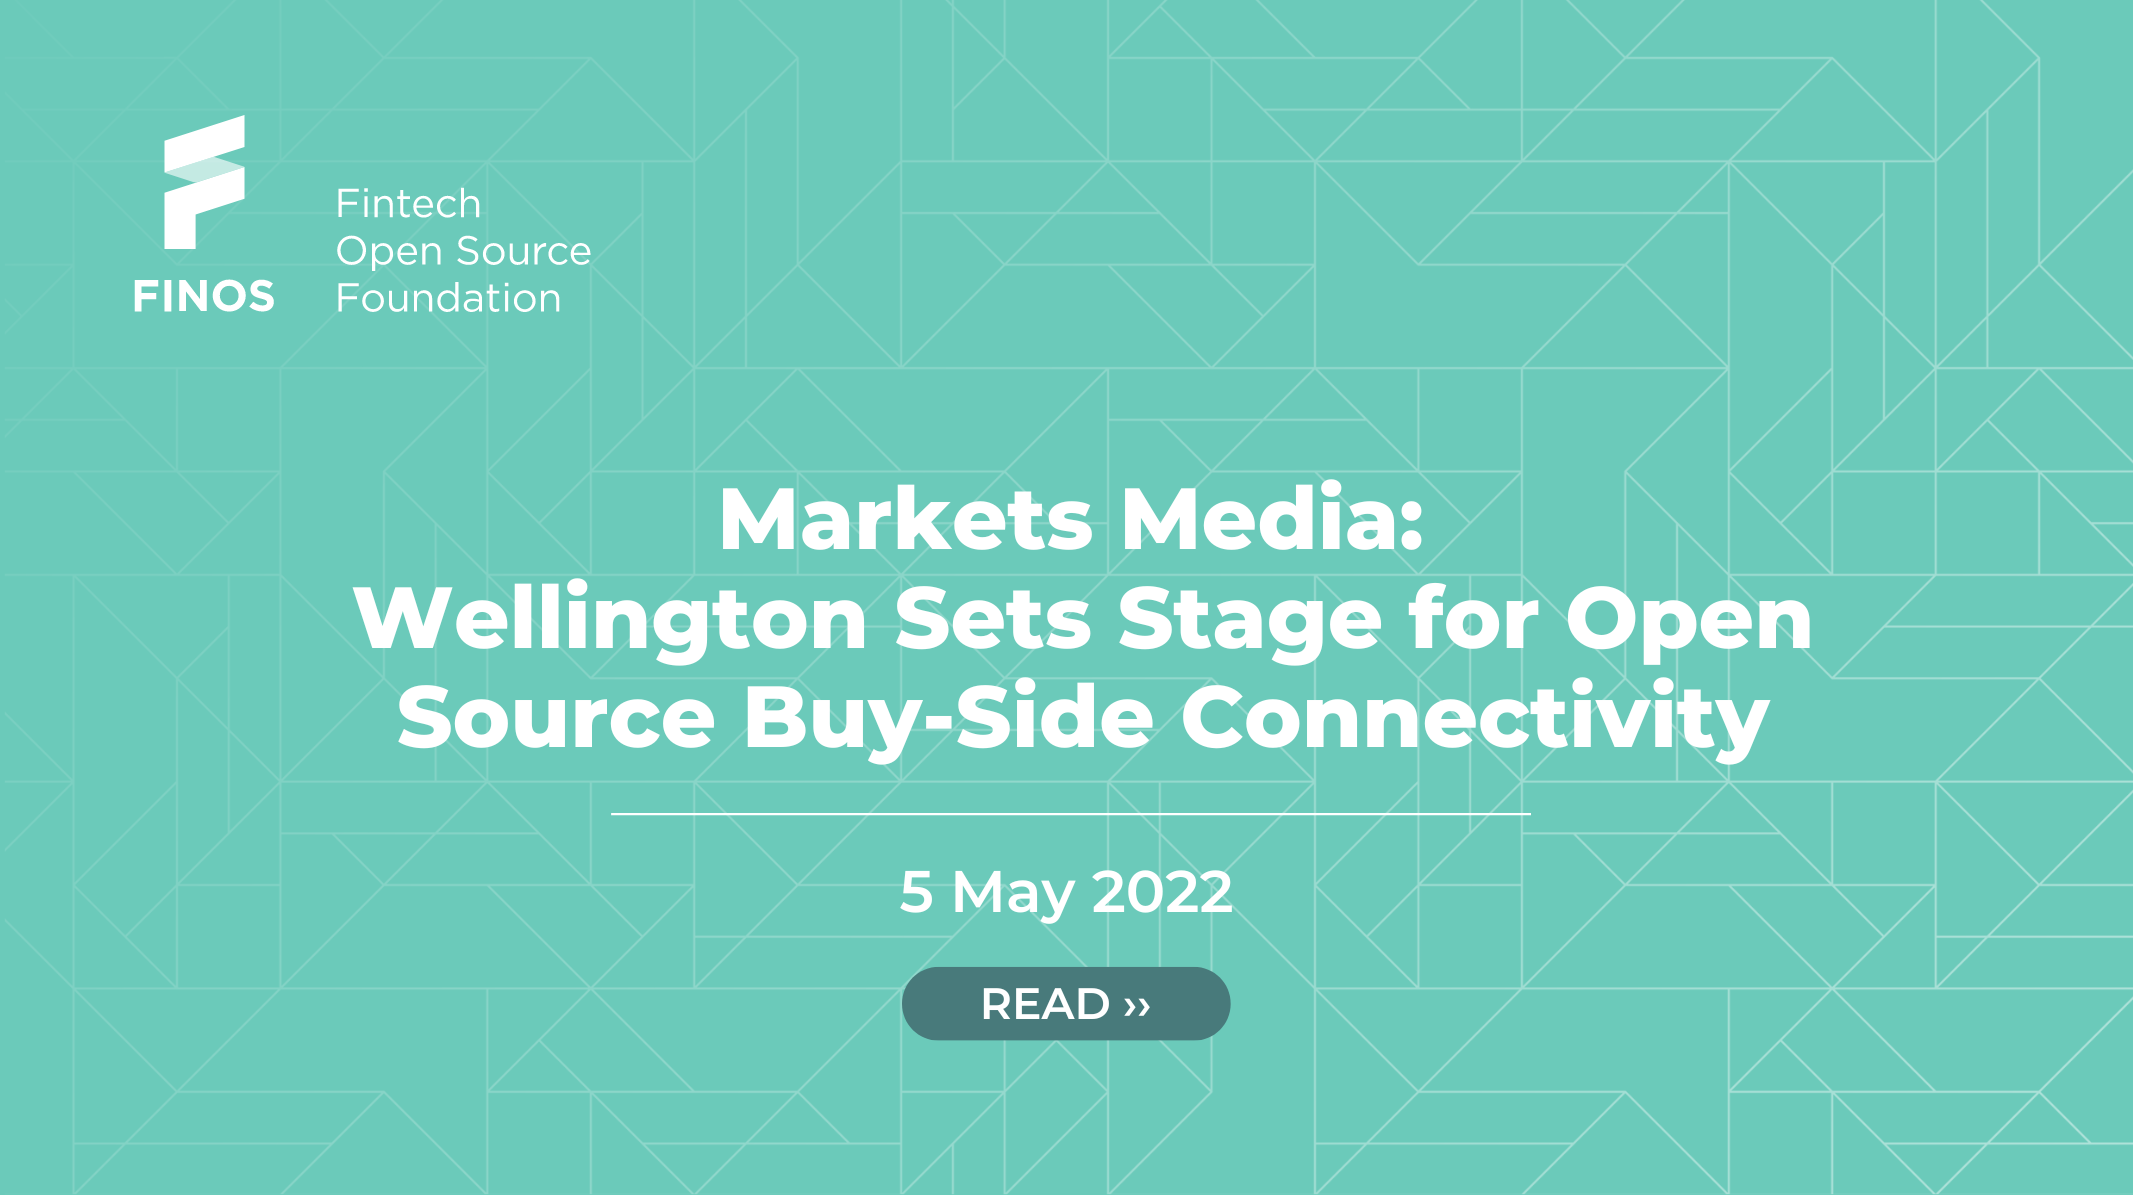 Markets Media: Wellington Sets Stage for Open Source Buy-Side Connectivity